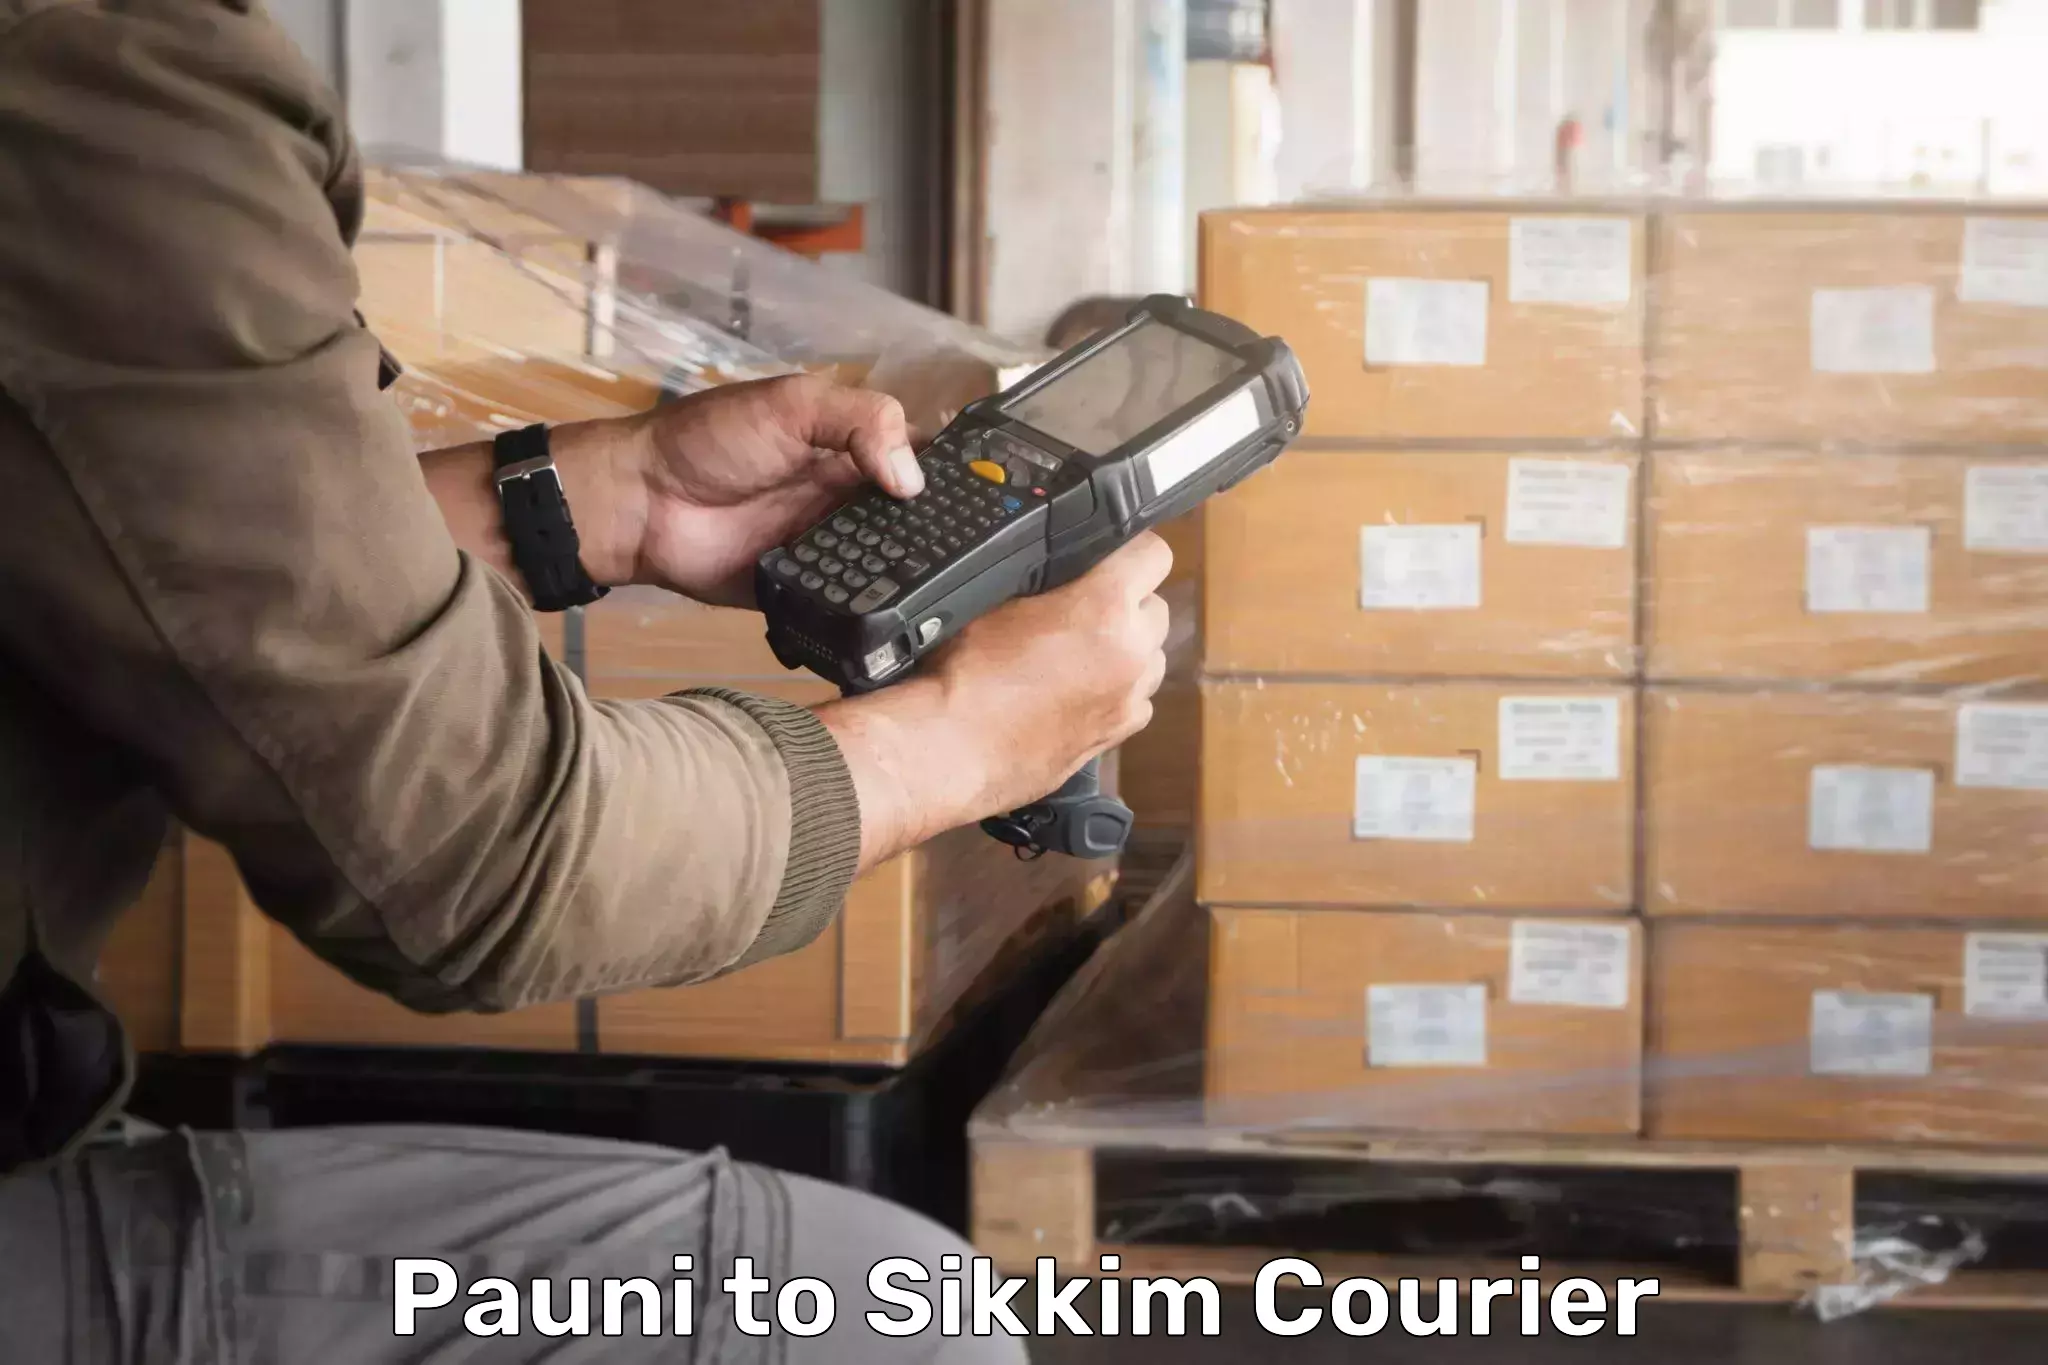 Sustainable courier practices Pauni to Pelling